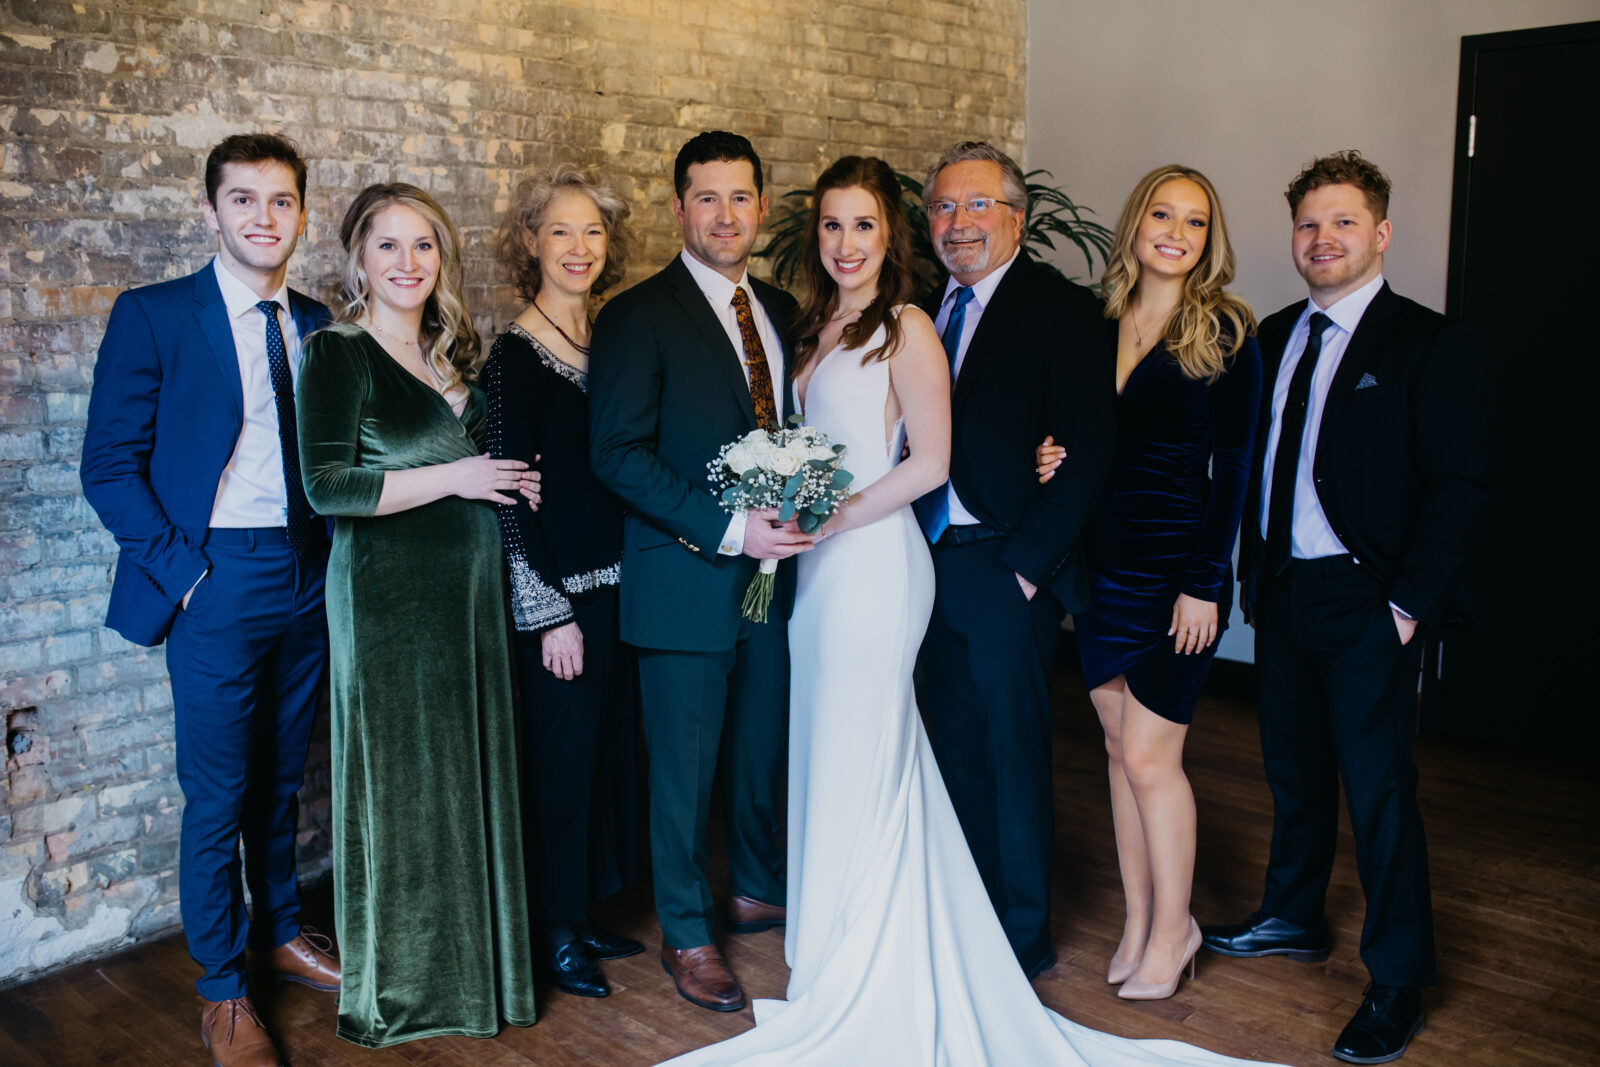 Photo of the bride and groom with their families and friends